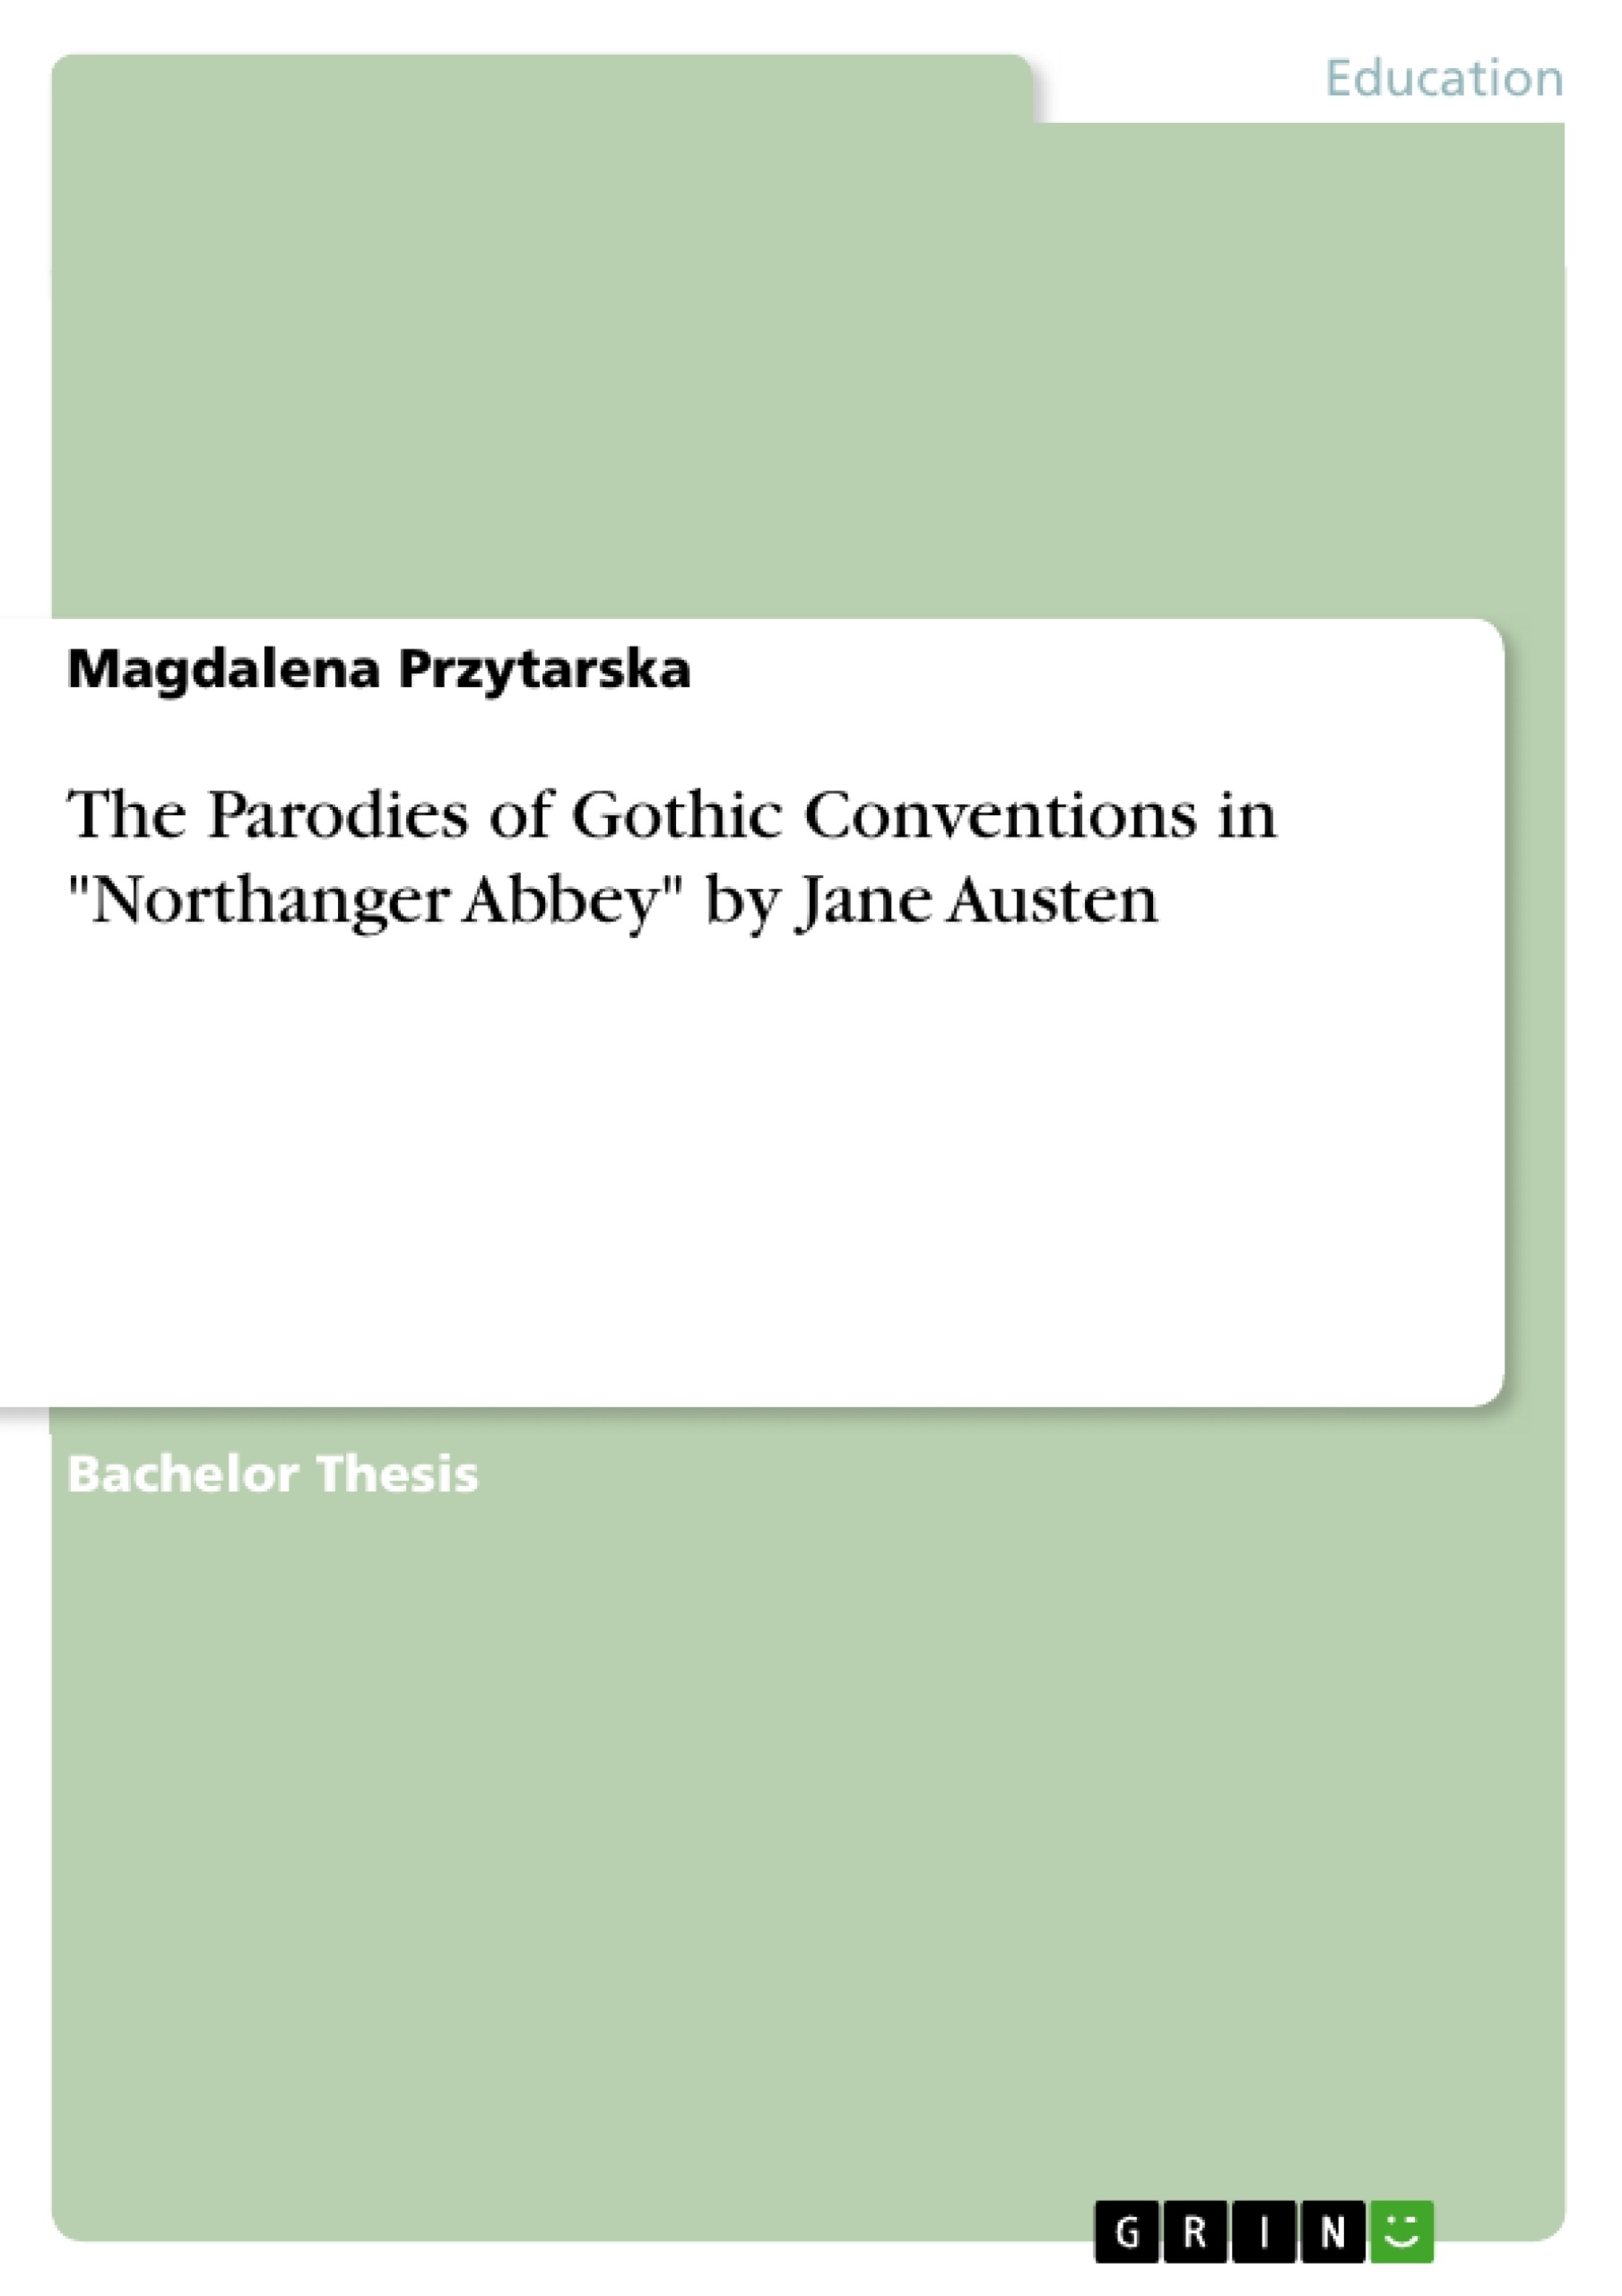 Title: The Parodies of Gothic Conventions in "Northanger Abbey" by Jane Austen